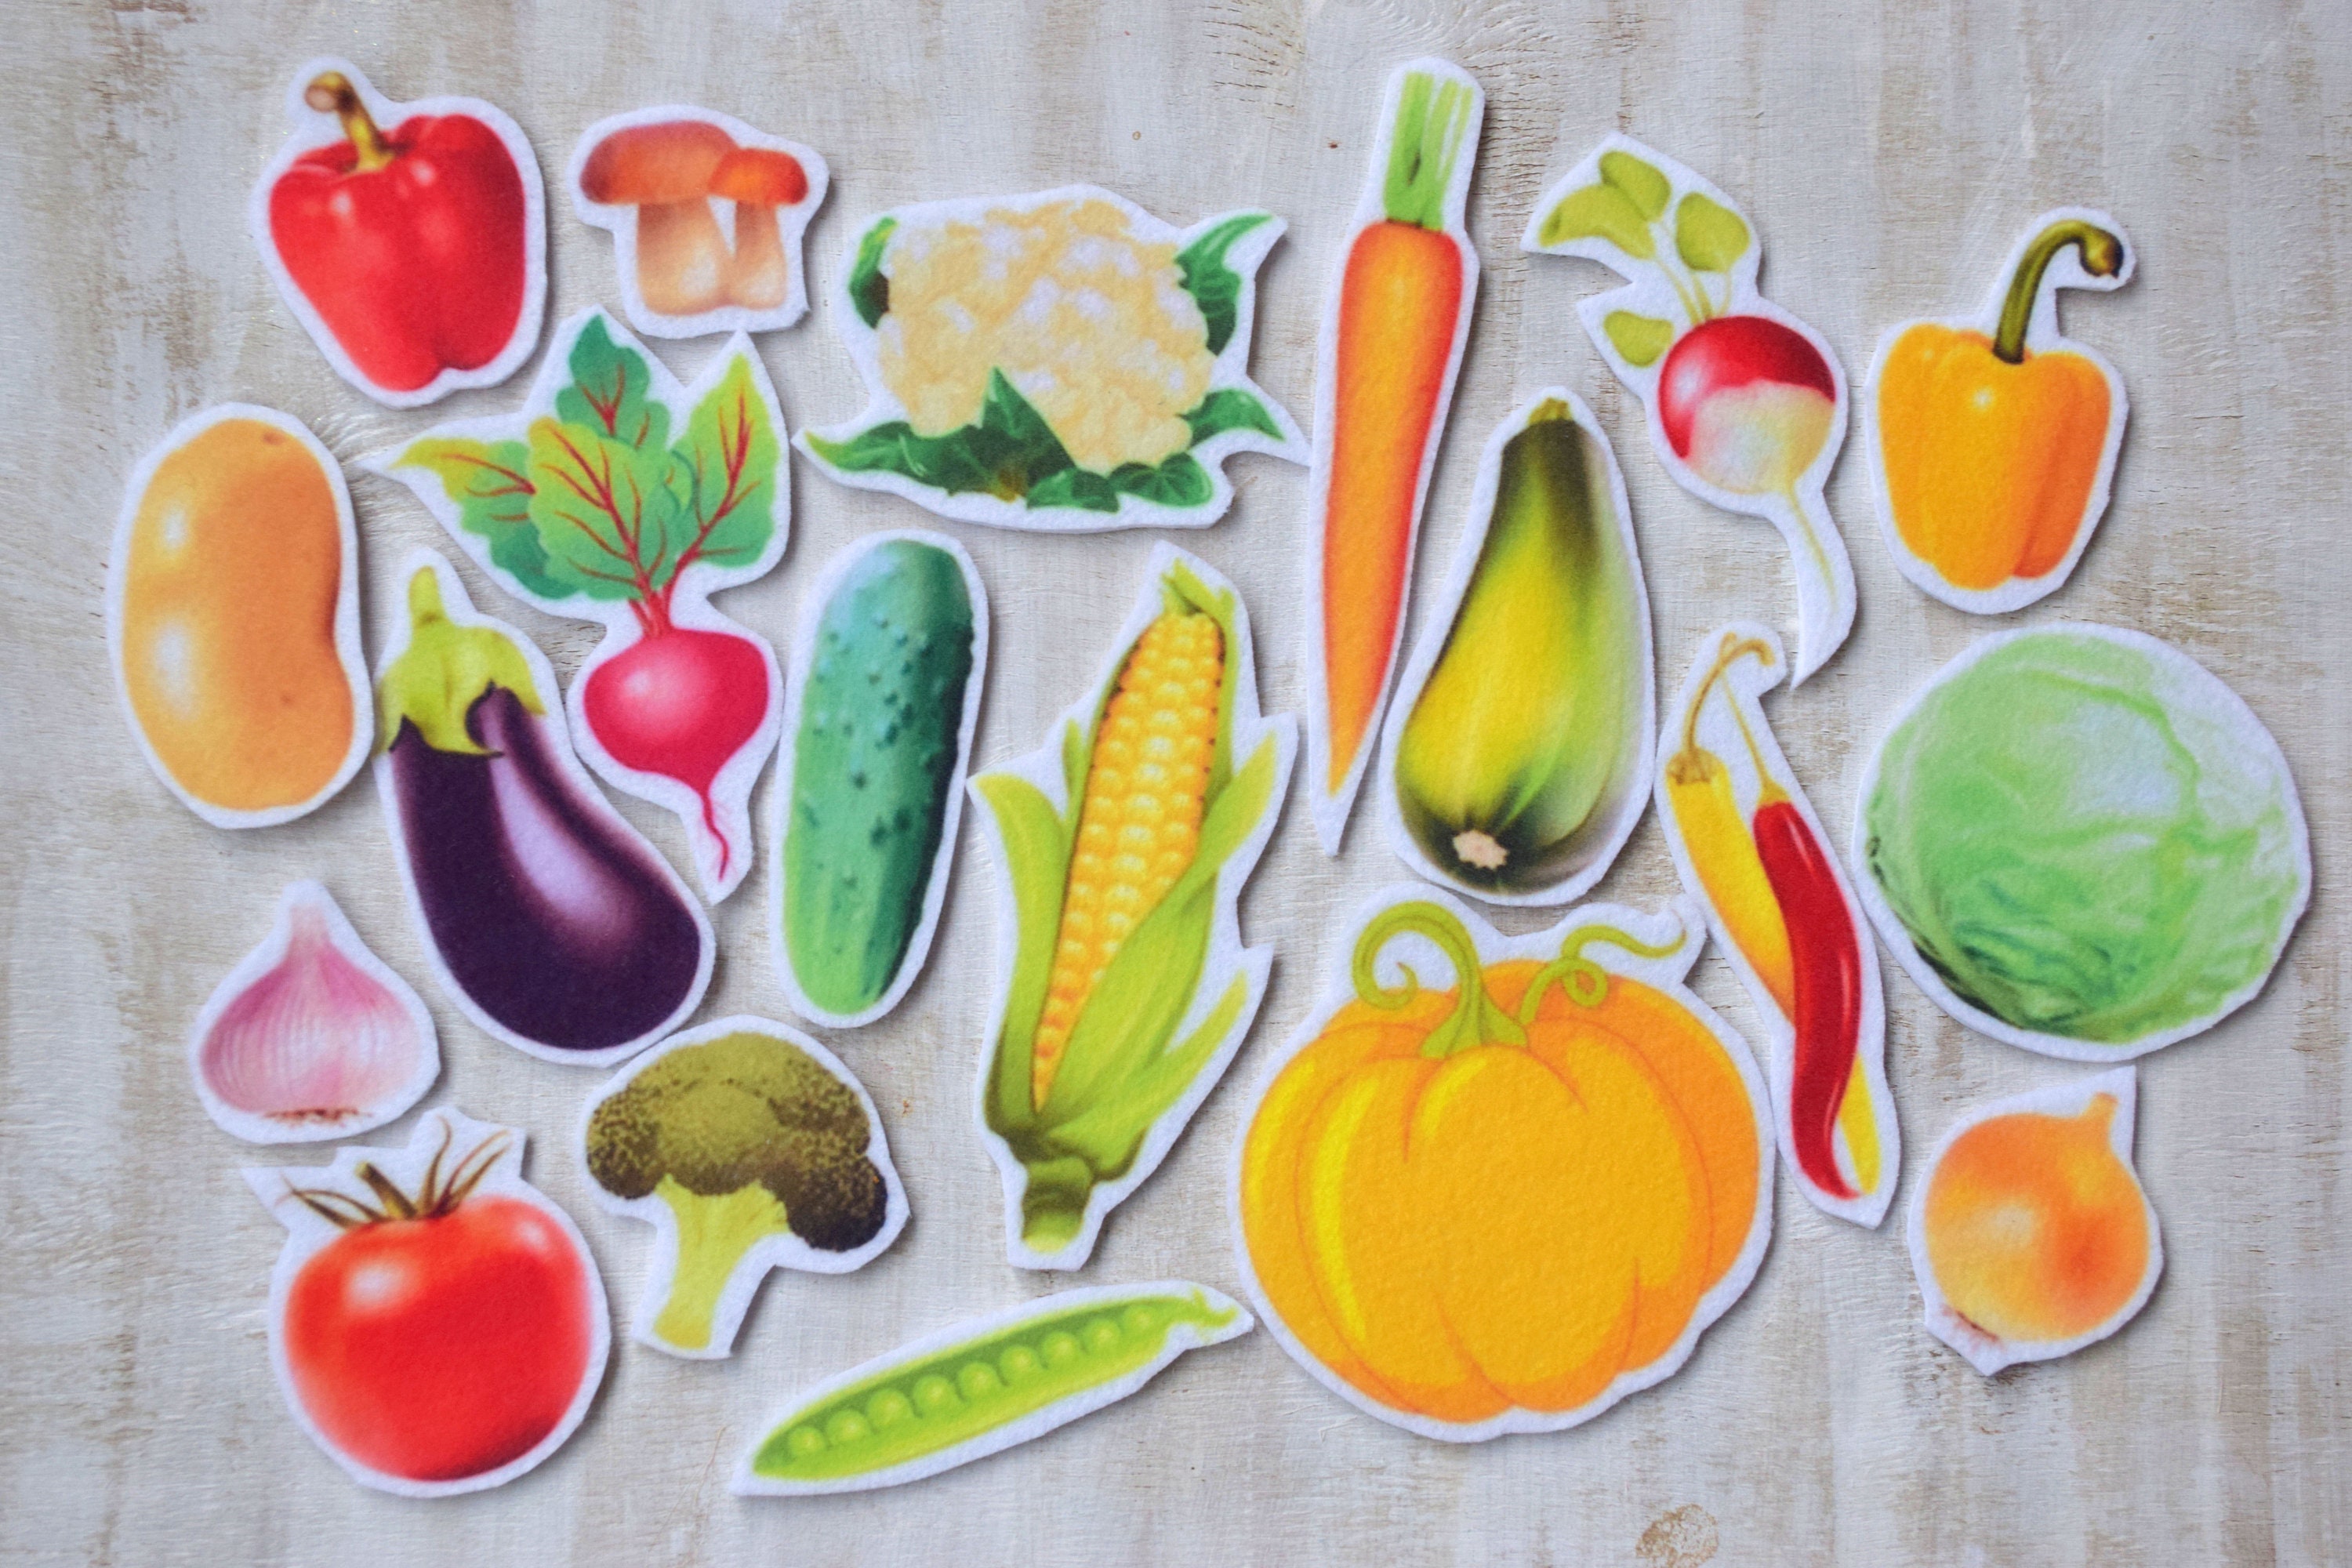 Foods Fruits Vegetables Dairy Grains Felt Play Art Set Flannel Board Story Storyboard Pieces 